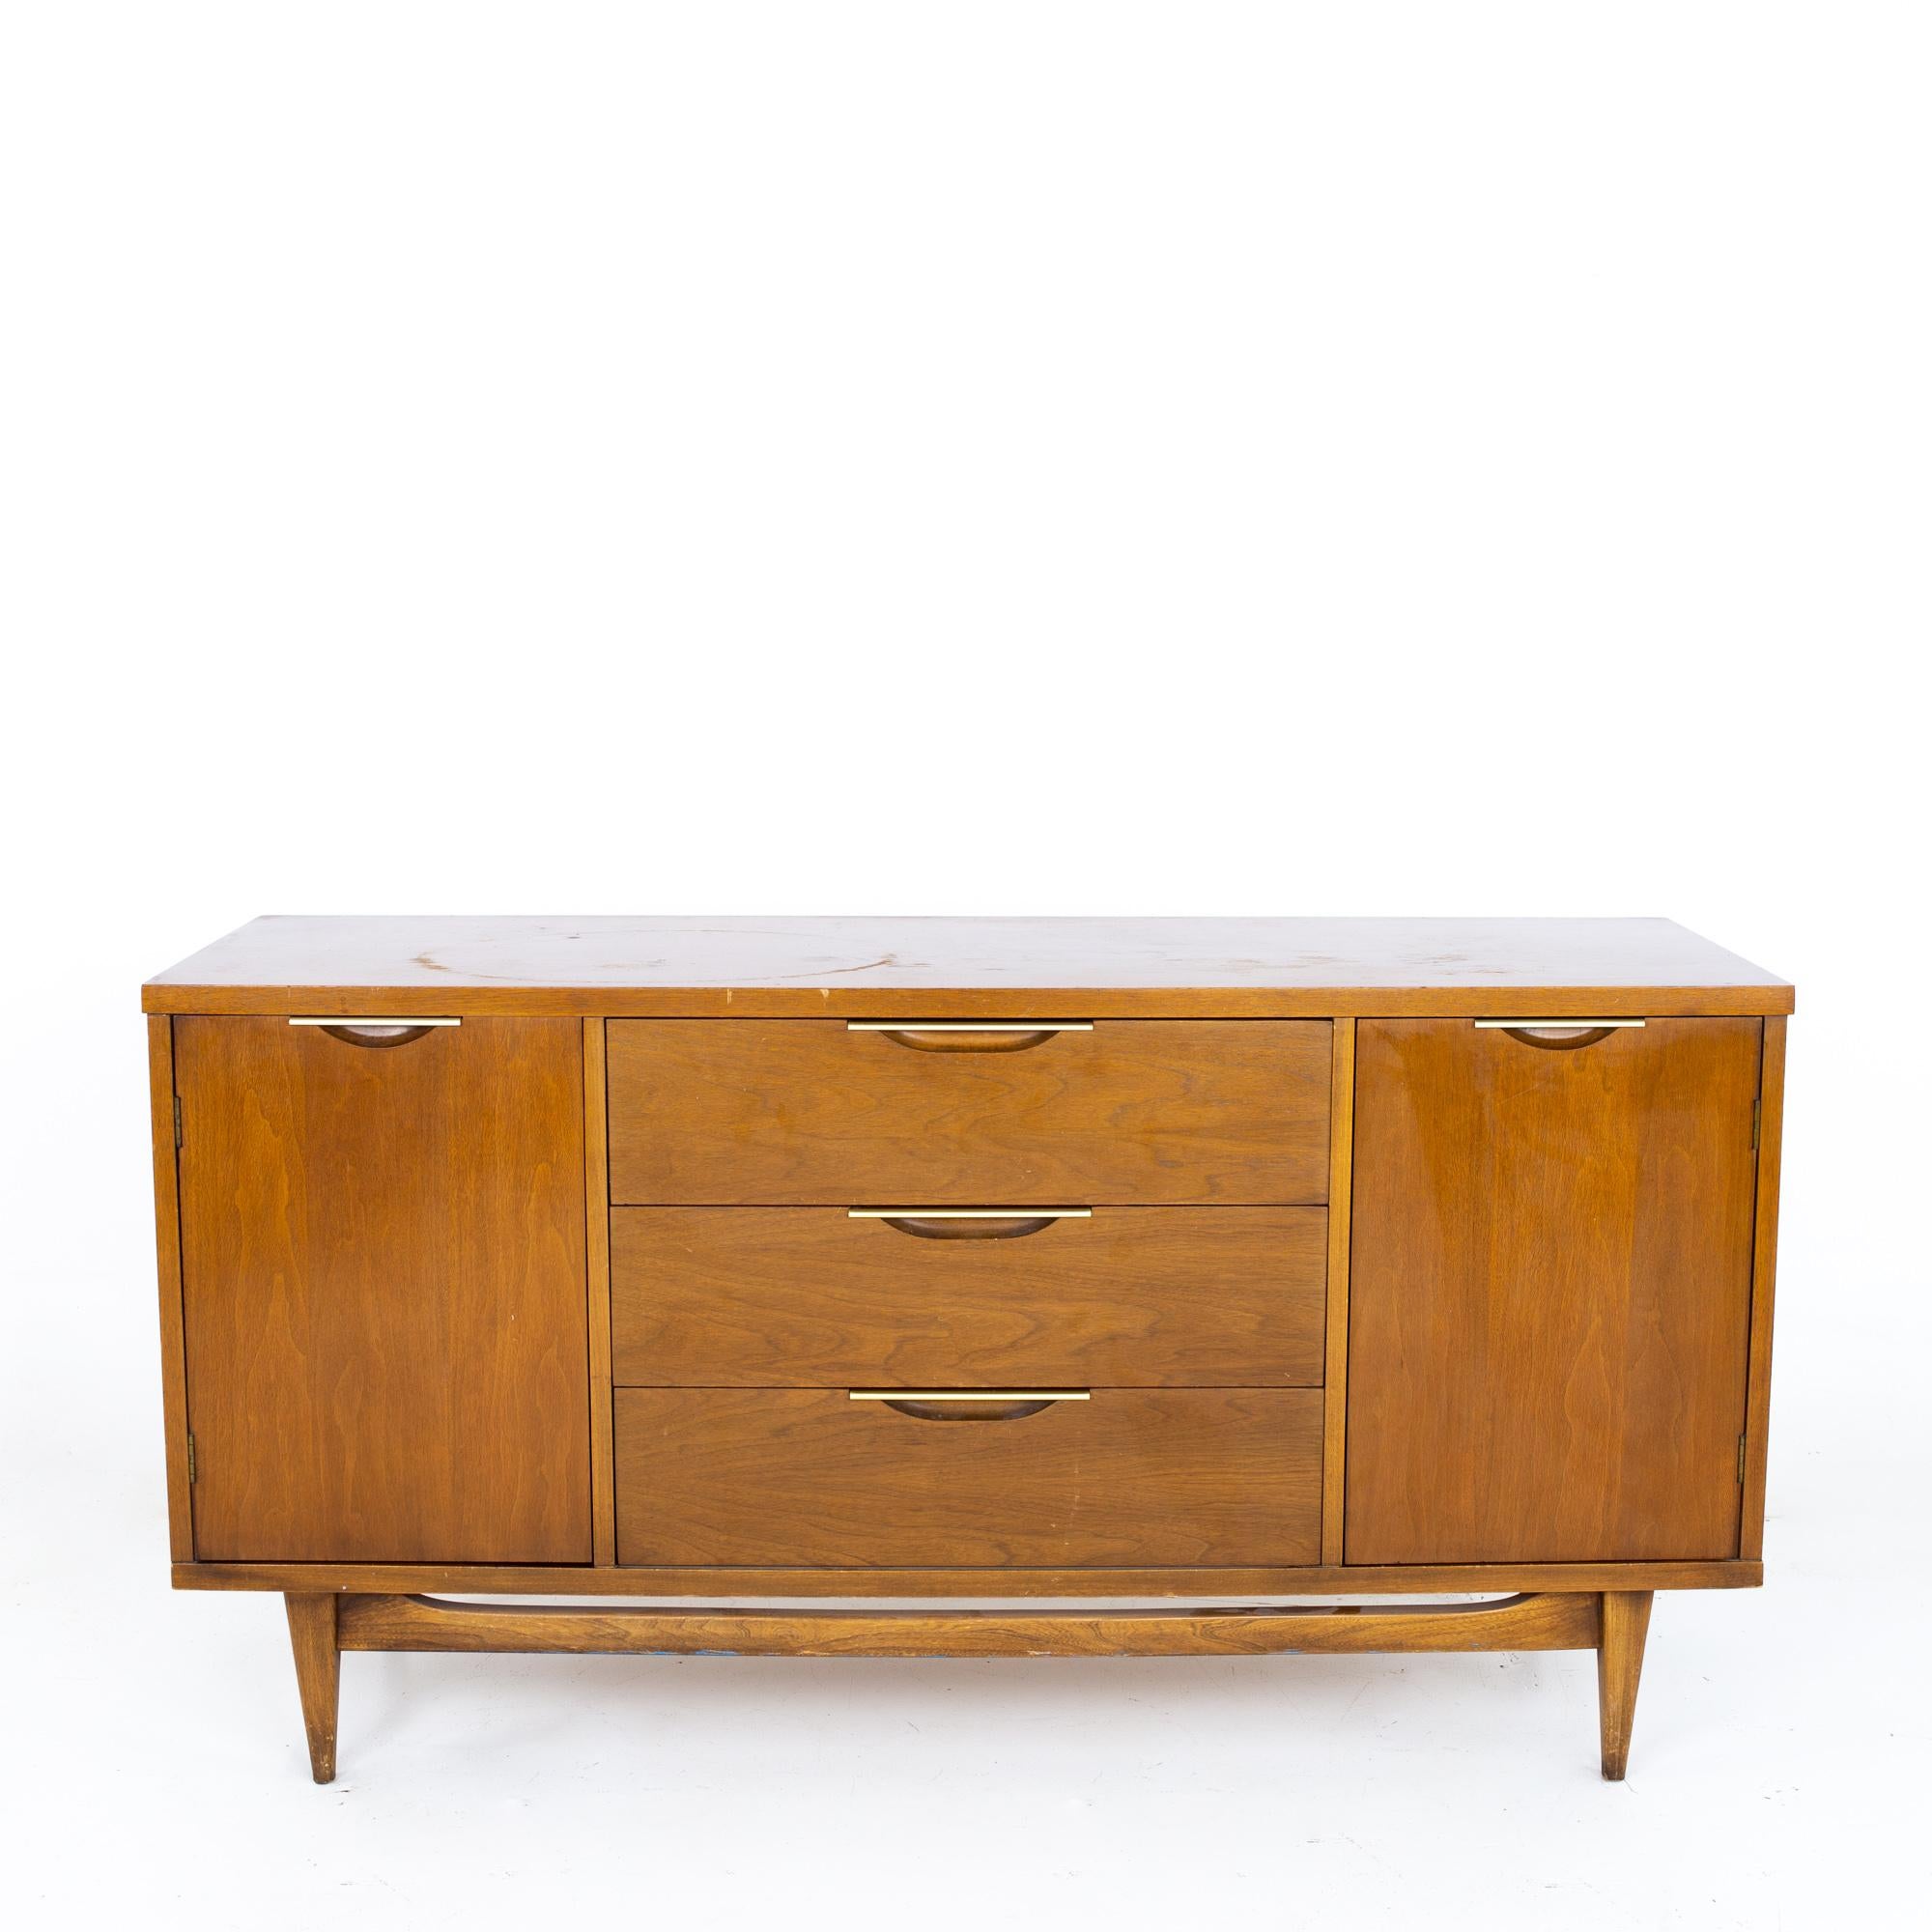 Kent Coffey tableau mid century walnut sideboard buffet credenza
Credenza measures: 58 wide x 18.5 deep x 30.5 inches high

All pieces of furniture can be had in what we call restored vintage condition. That means the piece is restored upon